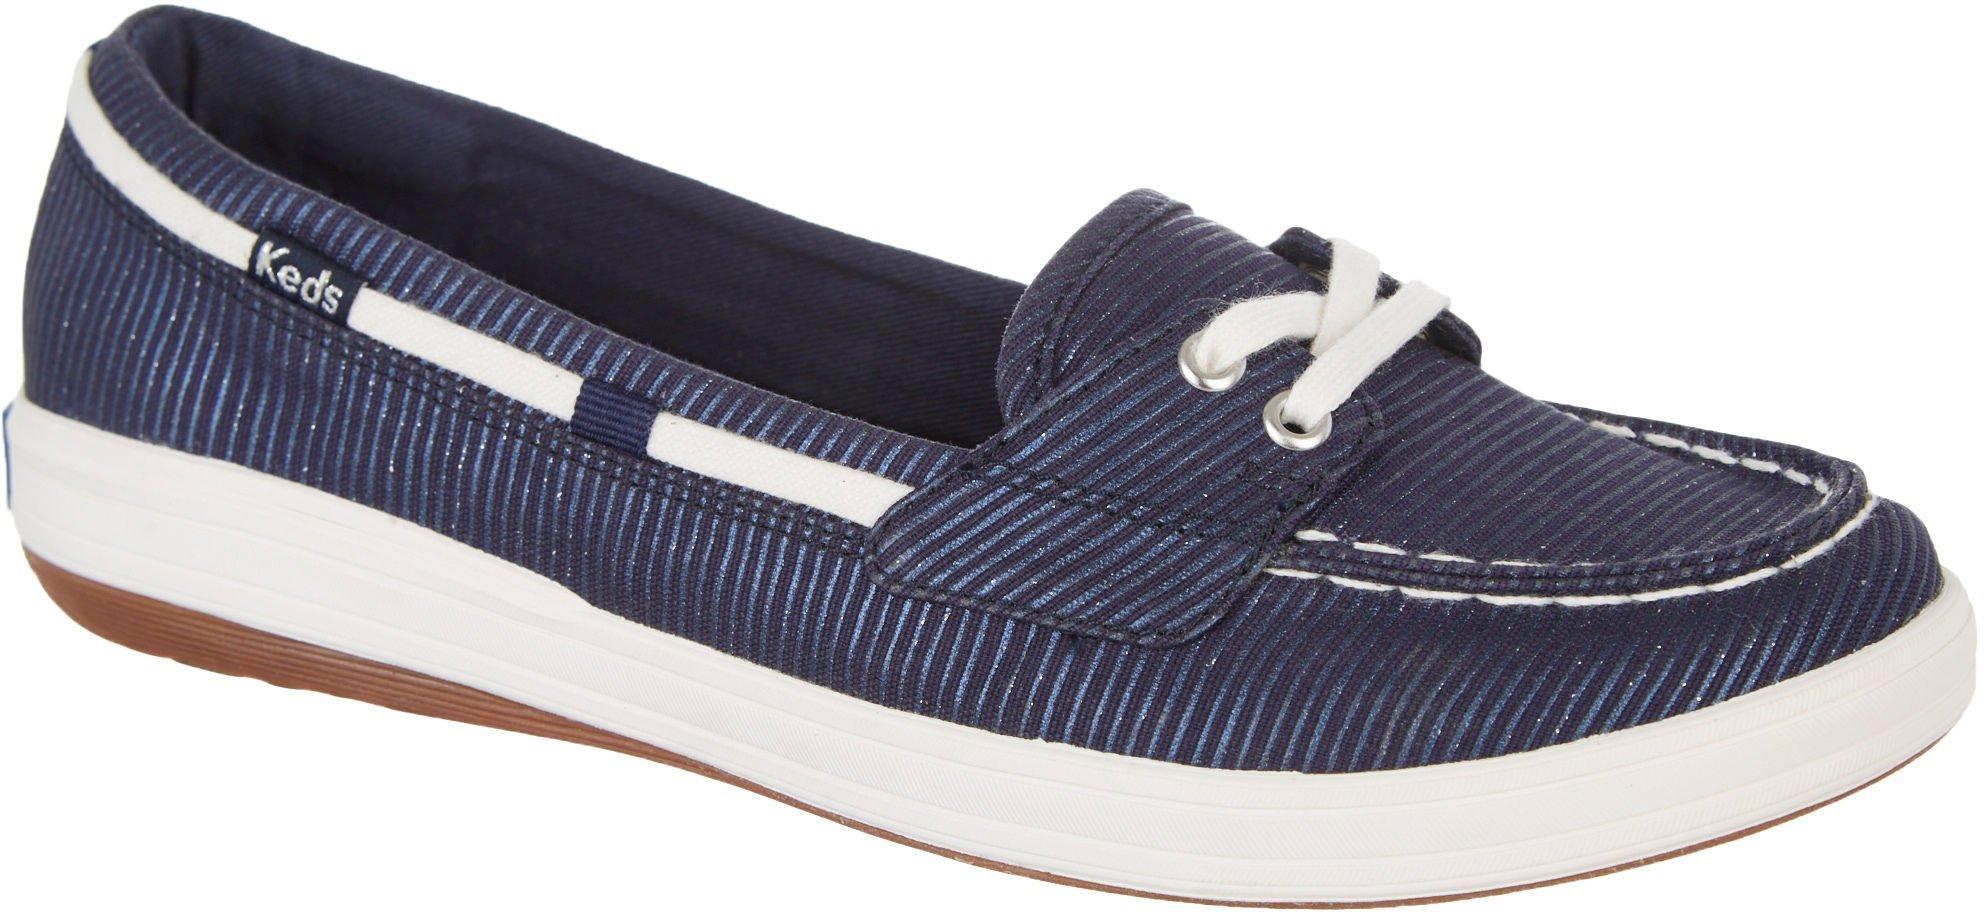 Women's Boat Shoes | Boat Shoes for Women | Bealls Florida